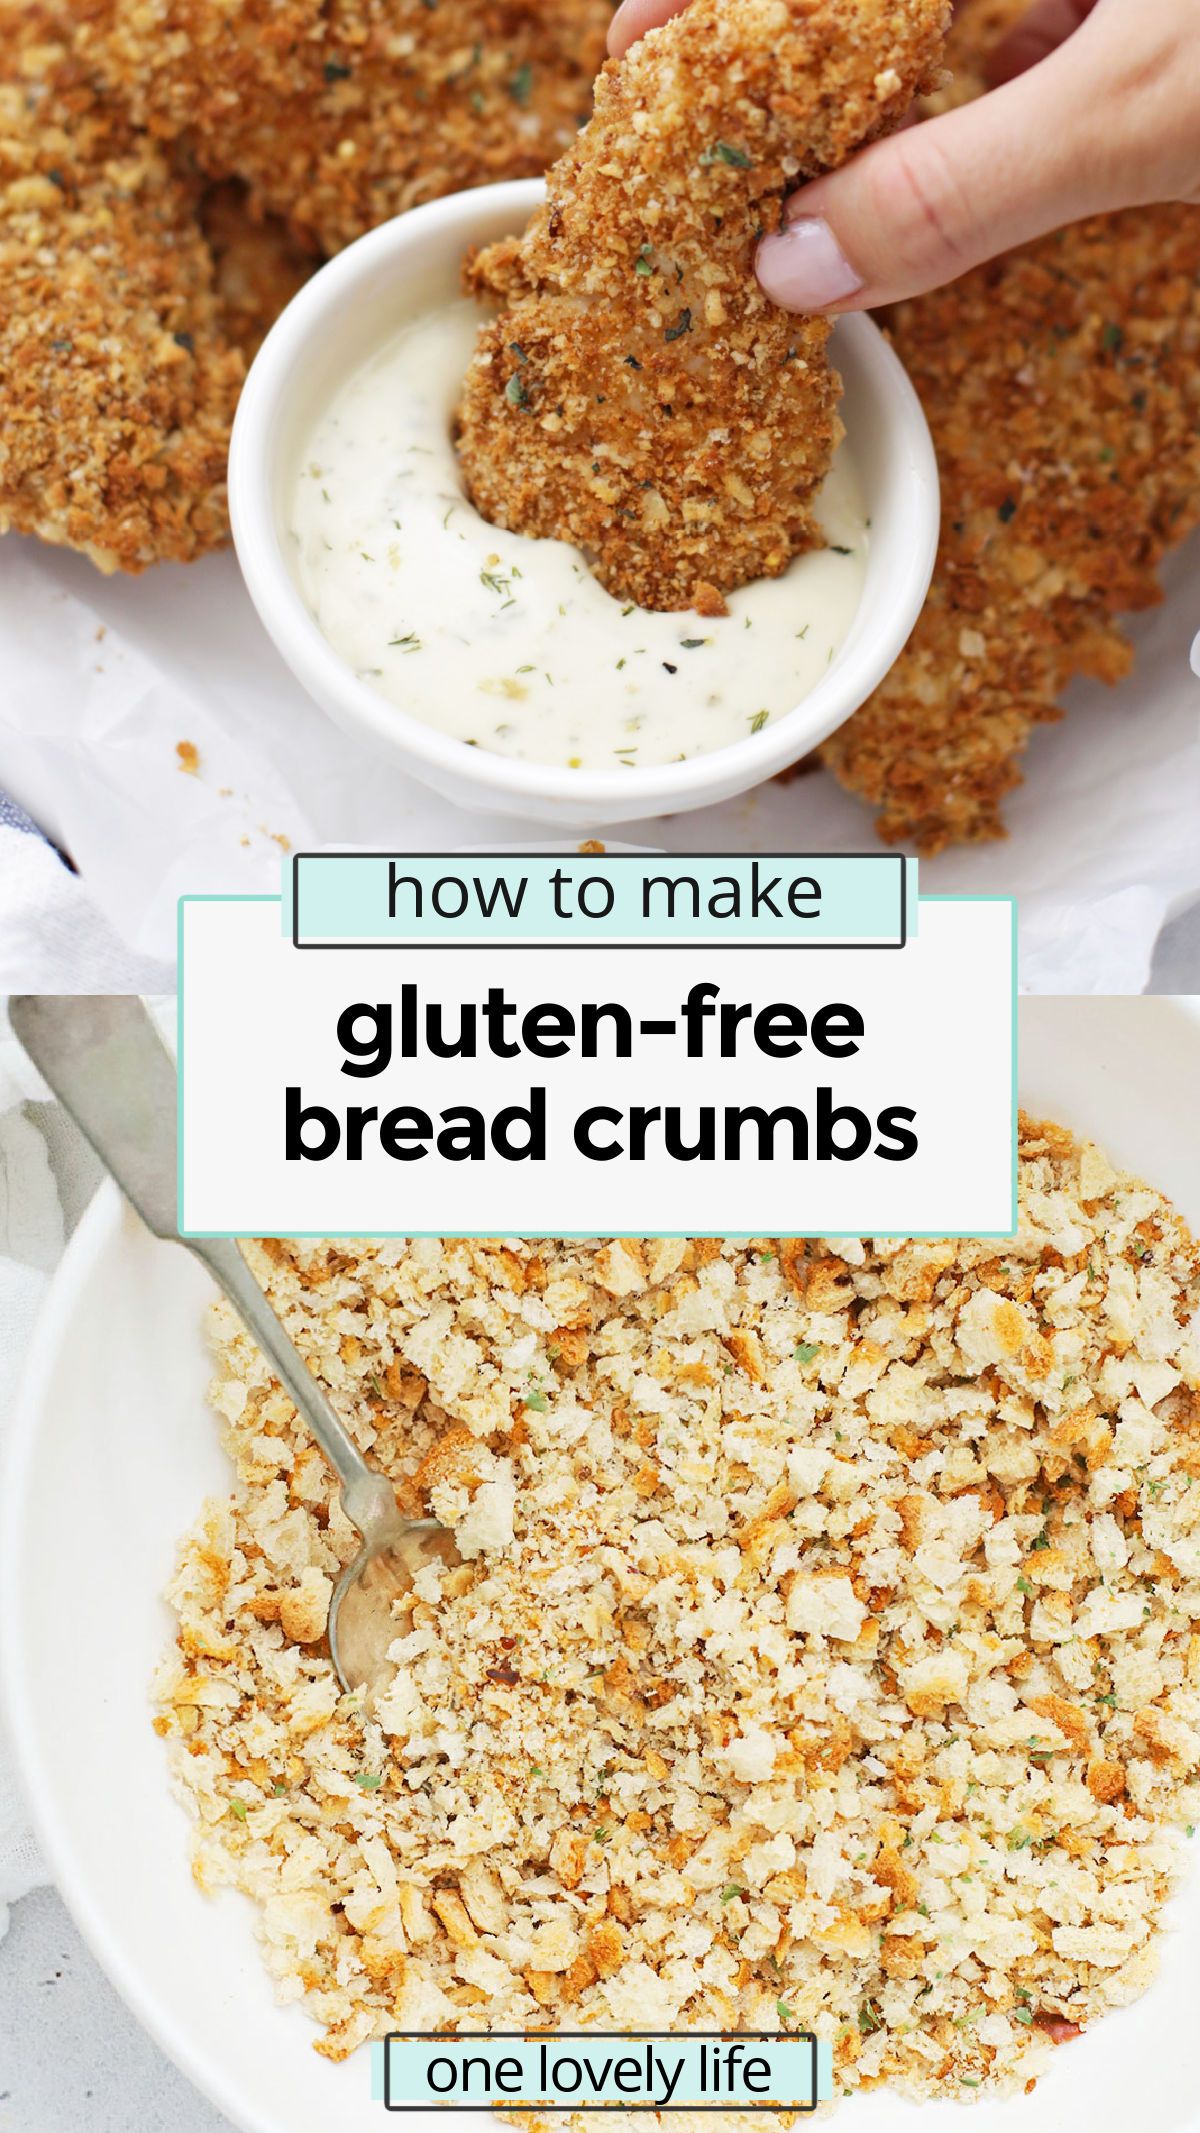 How to make homemade gluten-free bread crumbs. These gluten-free breadcrumbs are perfect for meatballs, meatloaf, or crispy chicken! / homemade gluten free breadcrumbs recipe / gluten-free italian bread crumbs / gluten free italian breadcrumbs / gluten-free bread crumbs recipe / homemade gluten-free panko recipe / gluten-free bread crumb recipe / how to make breadcrumbs / gluten-free panko bread crumbs / gluten-free panko breadcrumbs / gluten free crumb coating / gluten free crispy coating